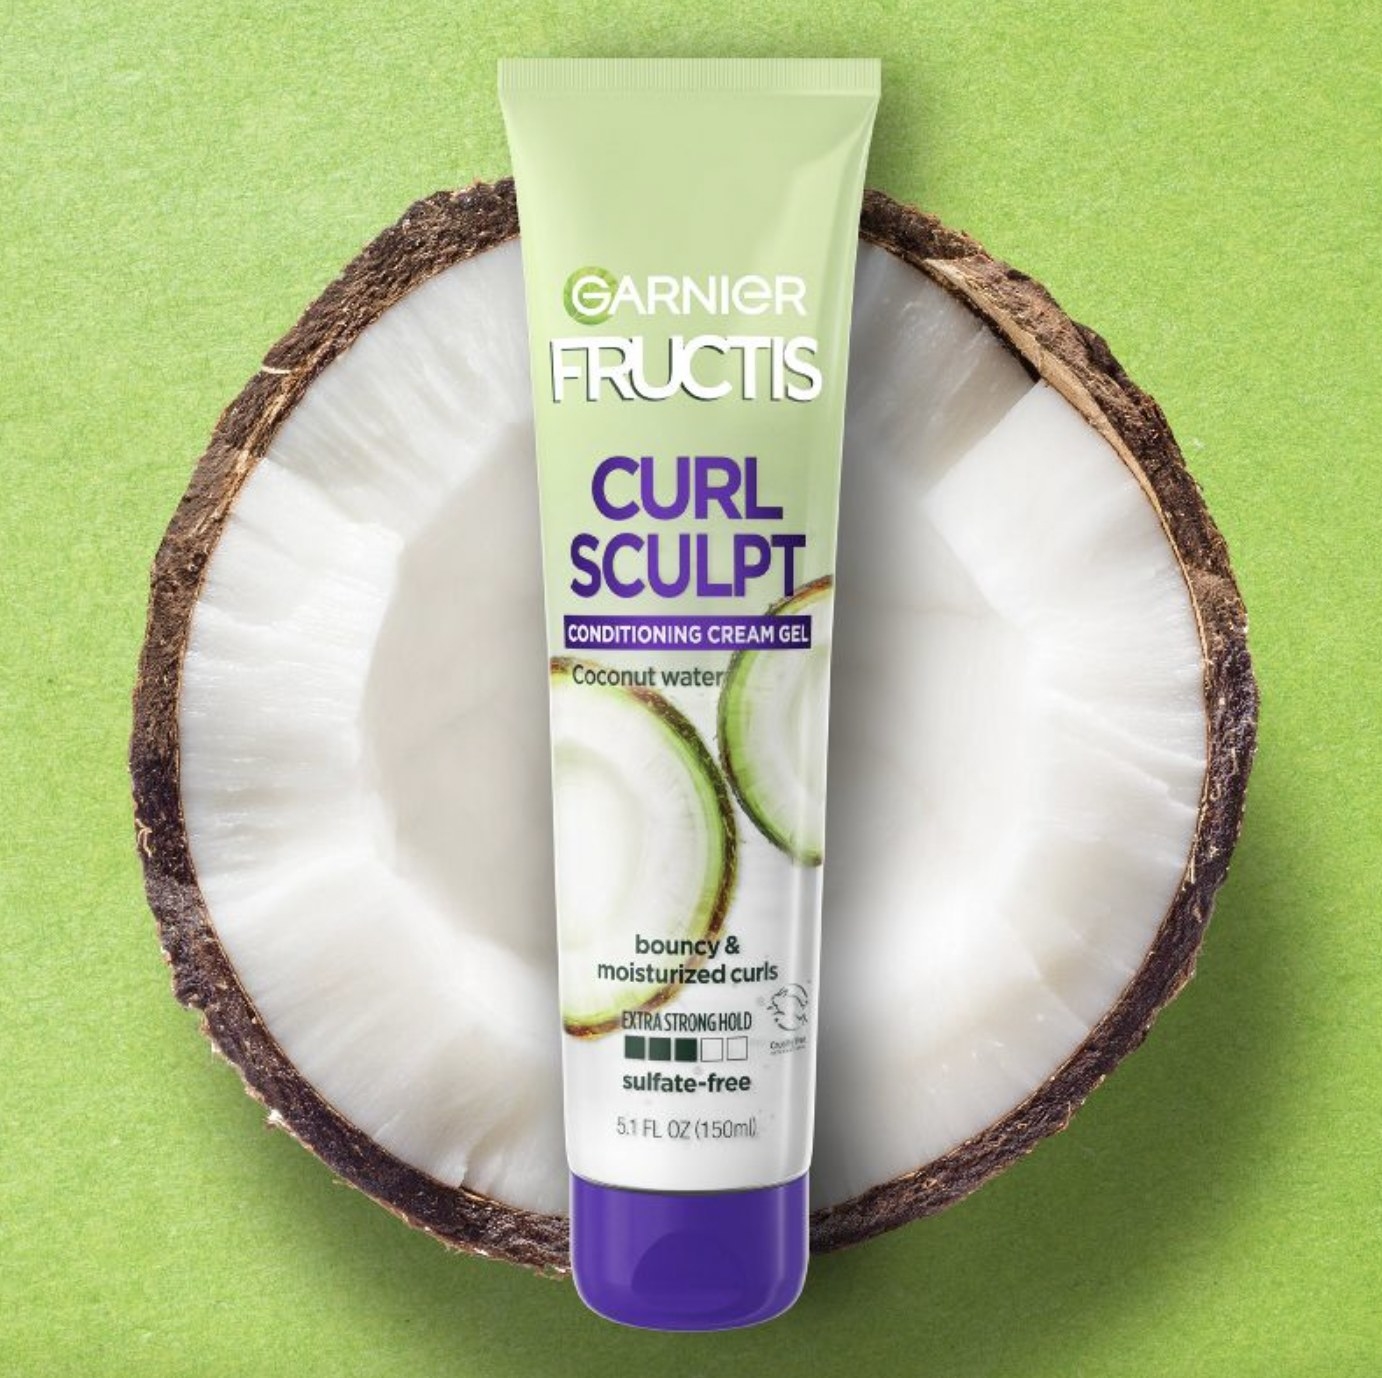 A tube of cream-gel on top of a cut coconut